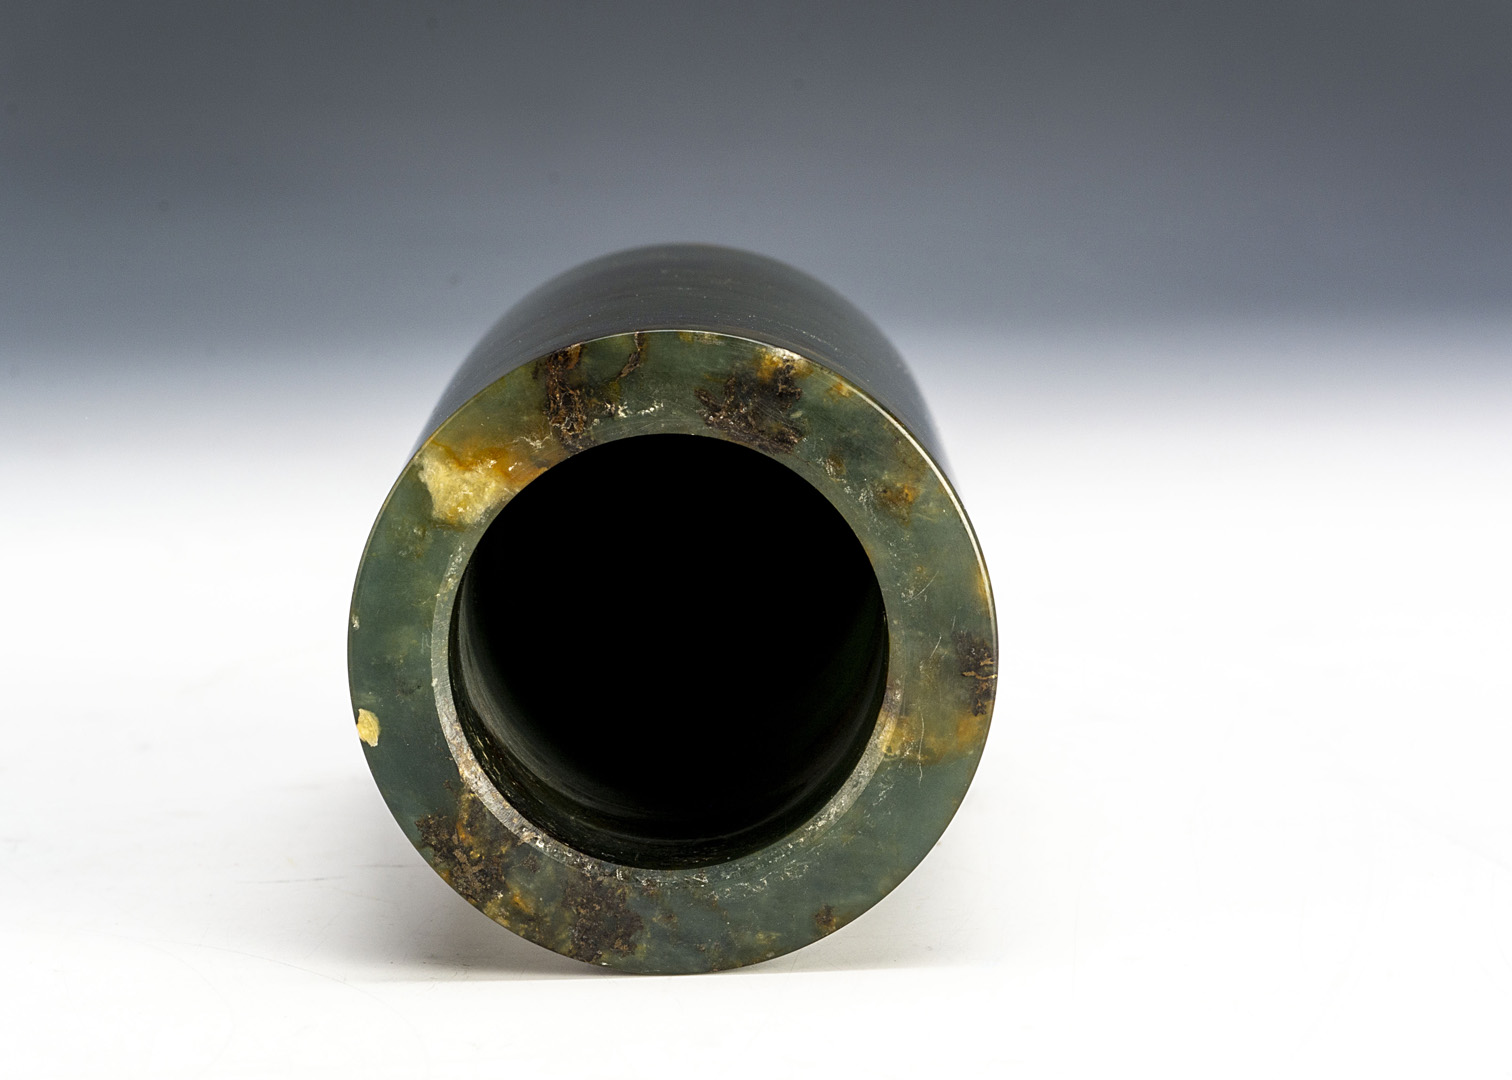 An early 20th century Nephrite Jade Chinese ink pot or small vase, with some inclusions plain - Image 3 of 3